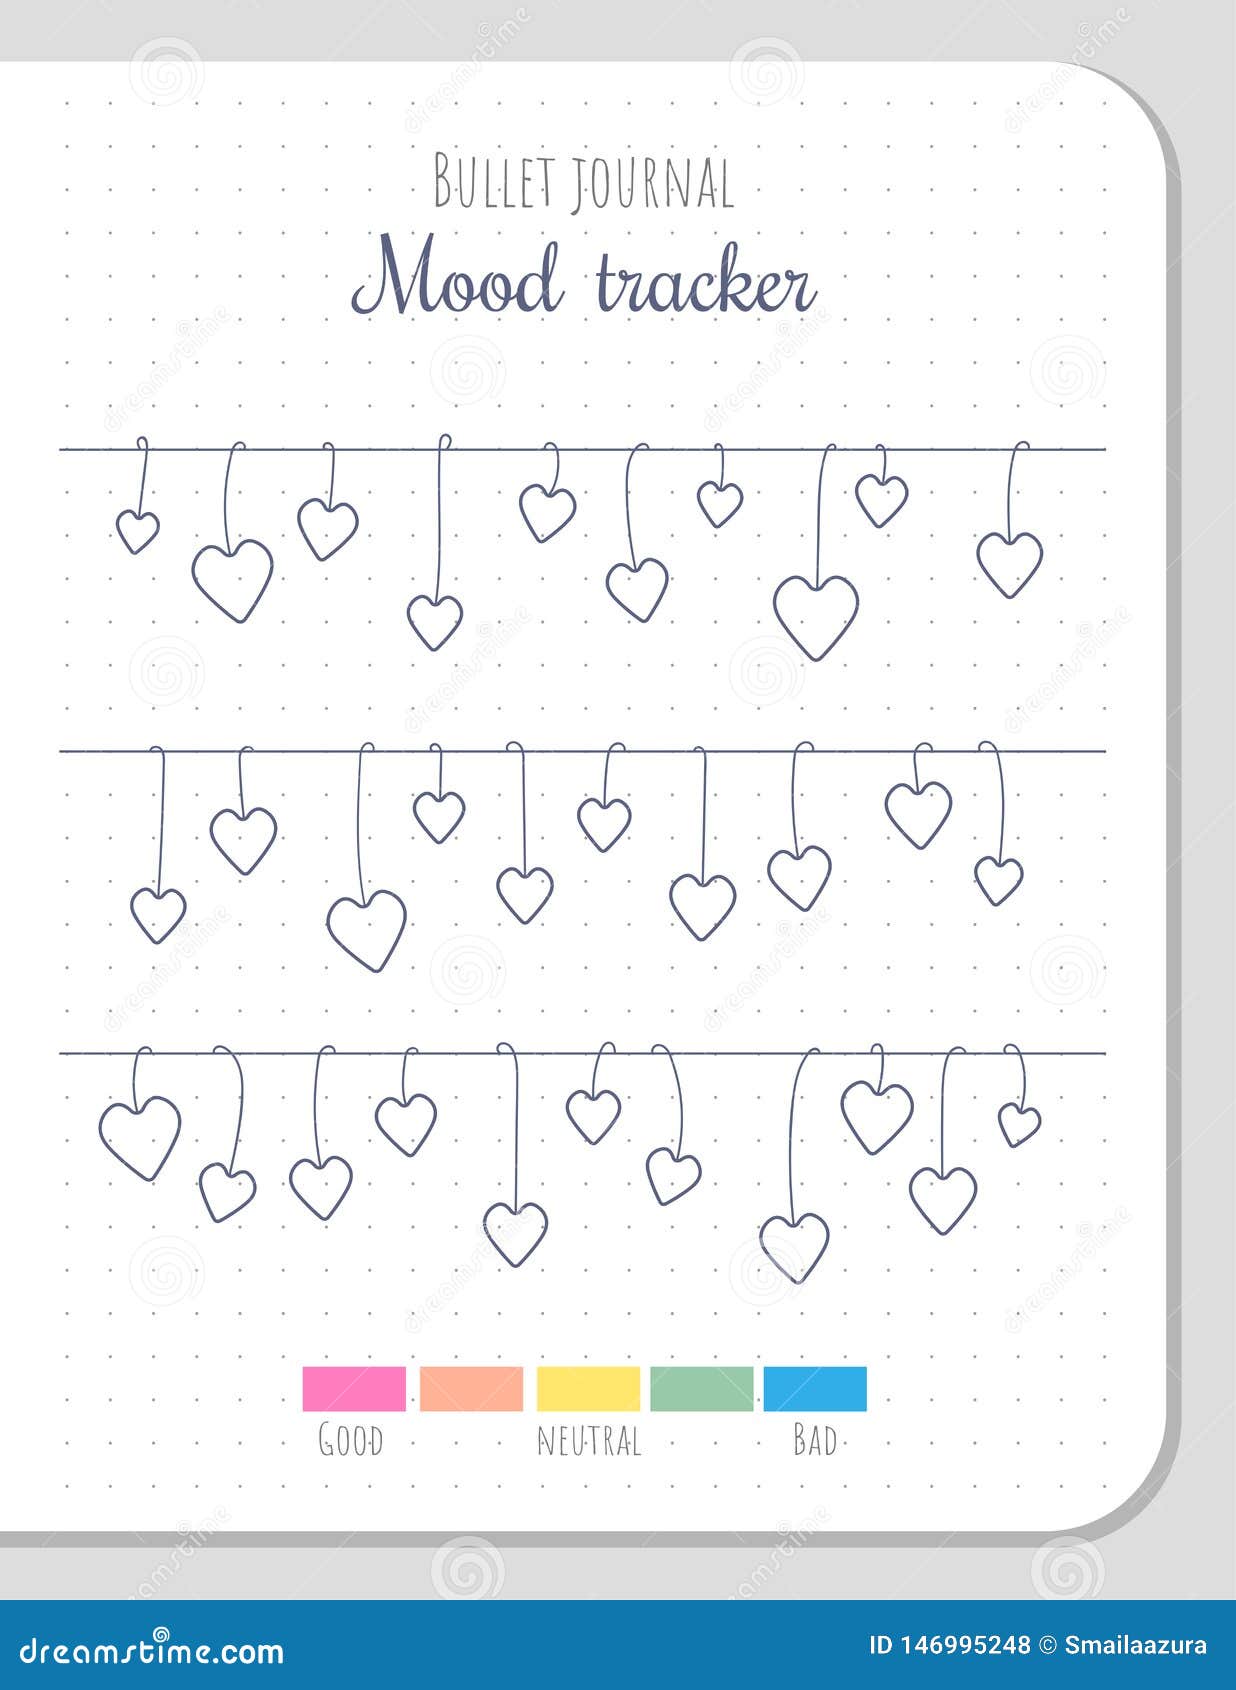 mood-tracker-blank-template-for-bullet-journal-stock-vector-illustration-of-graph-notes